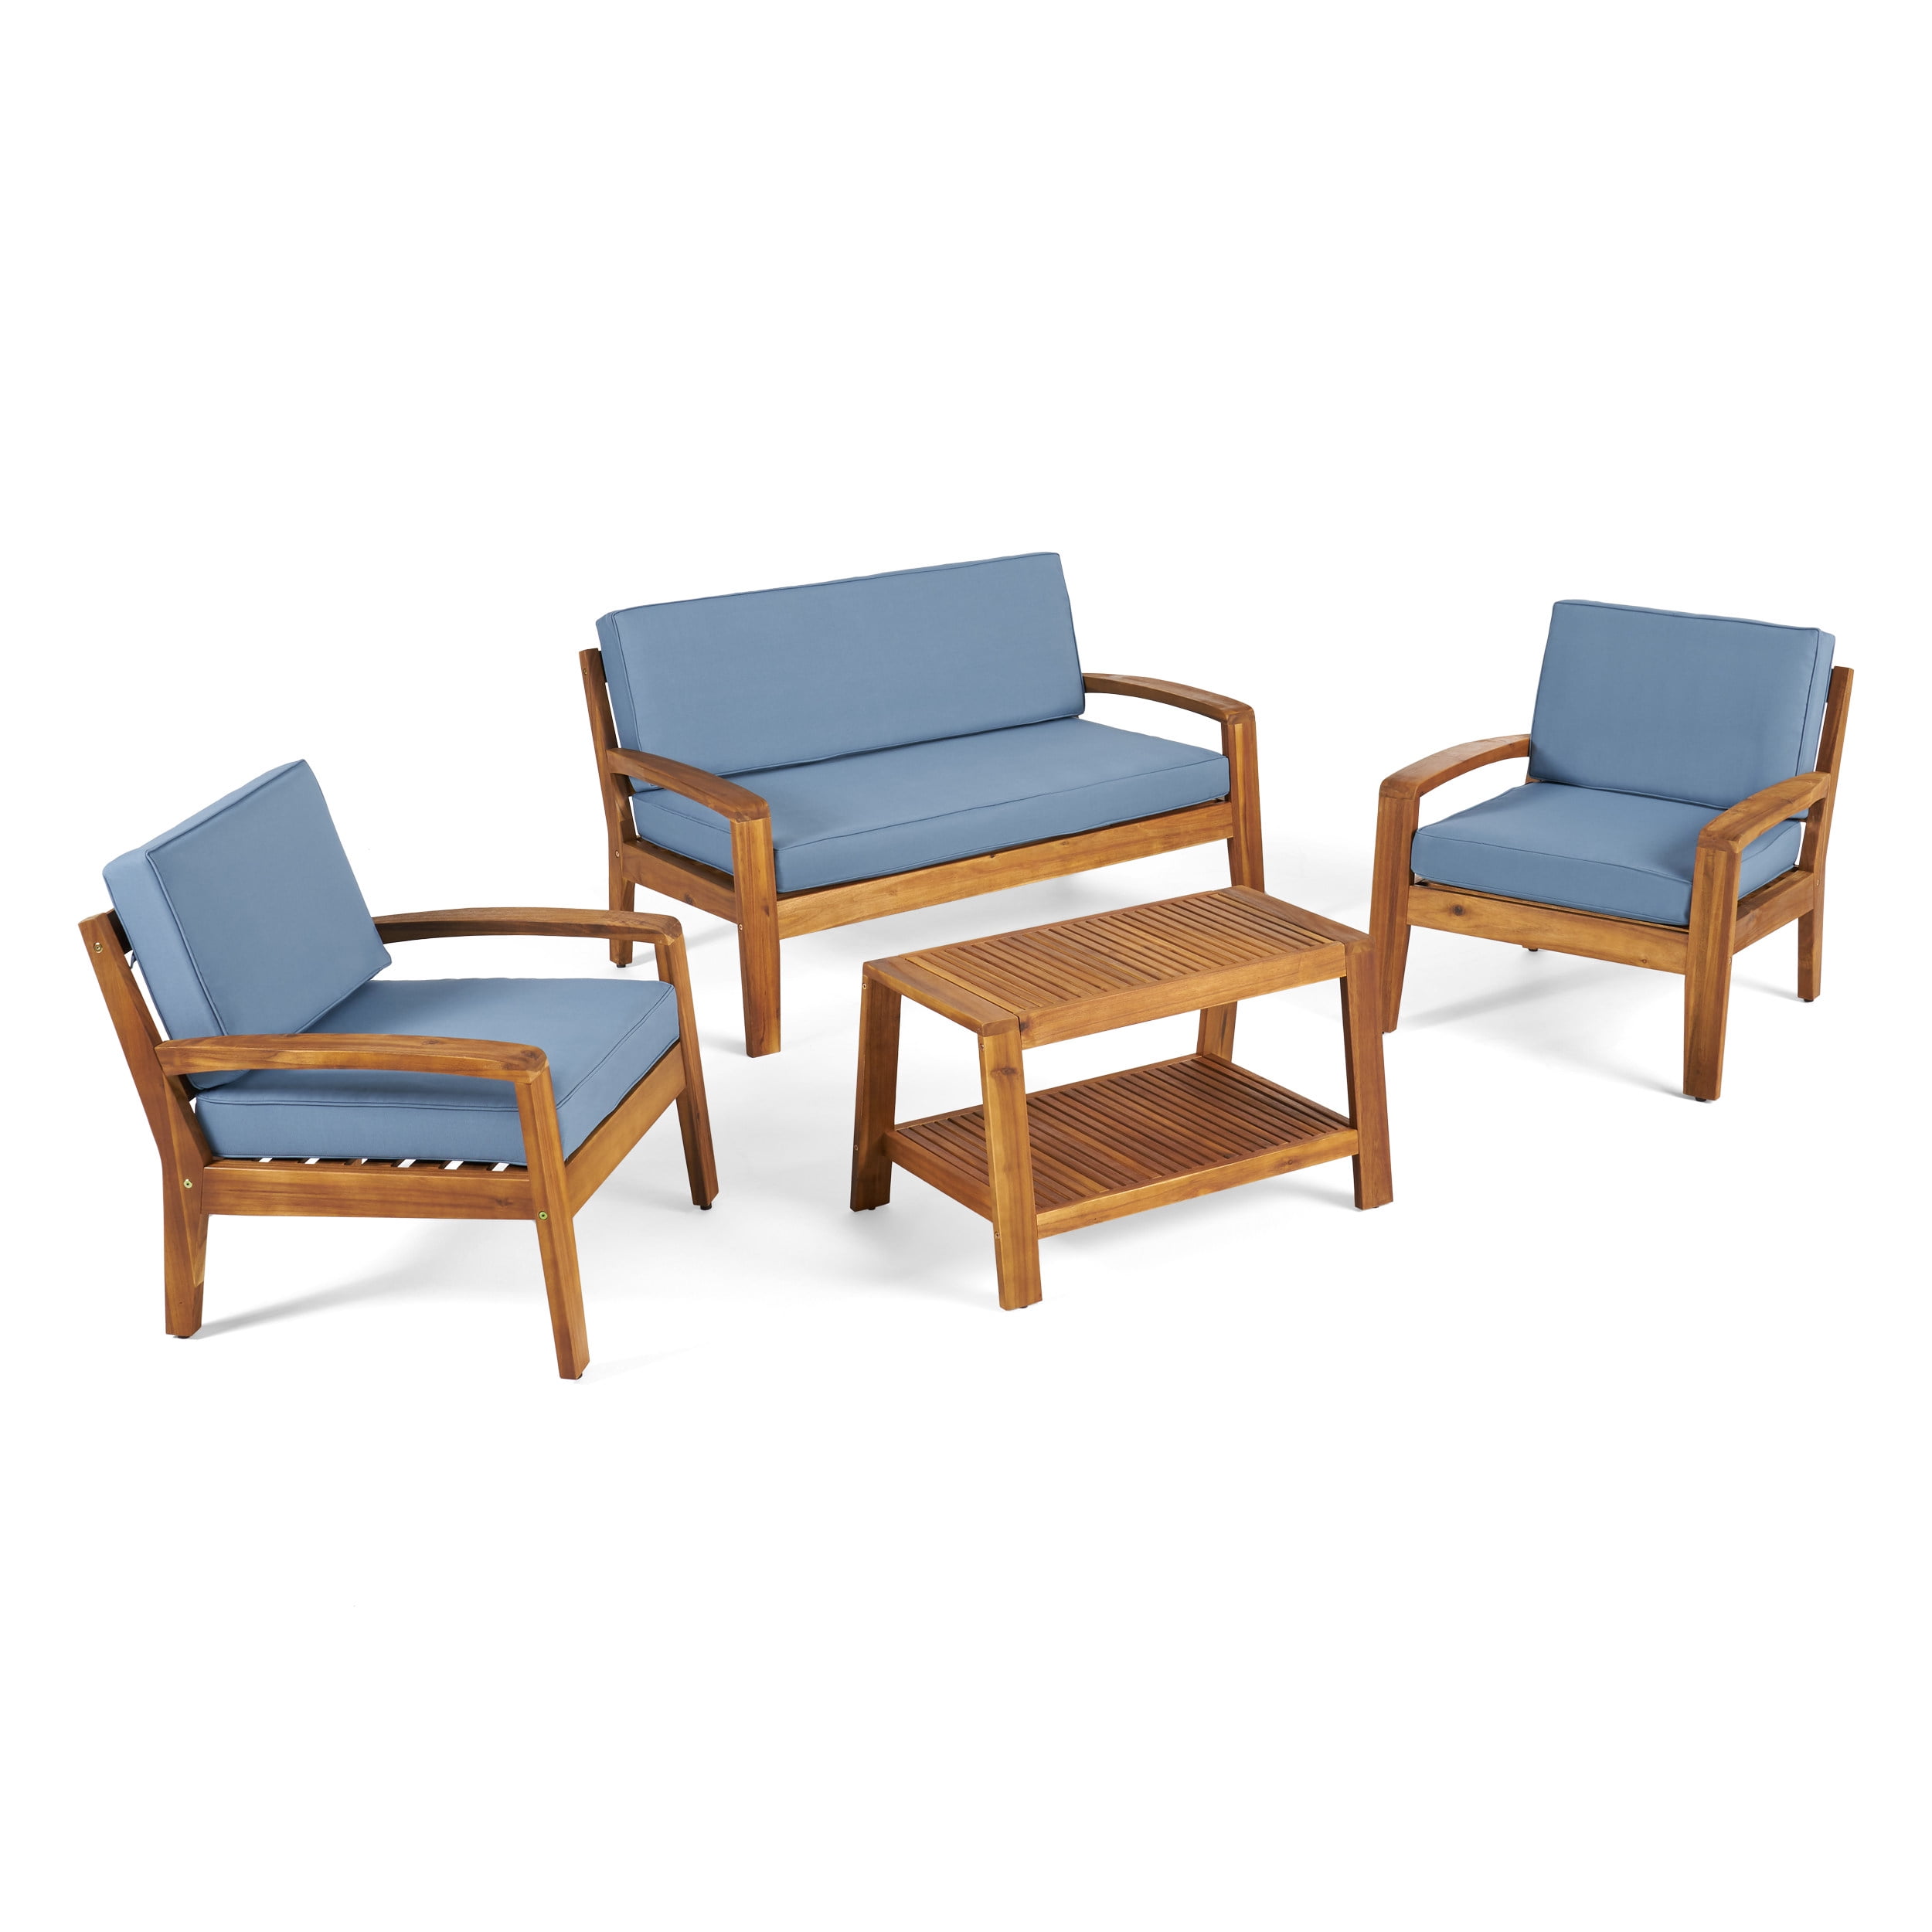 Parma 4 Piece Outdoor Wood Patio Furniture Chat Set with Water Resistant Cushions, Blue